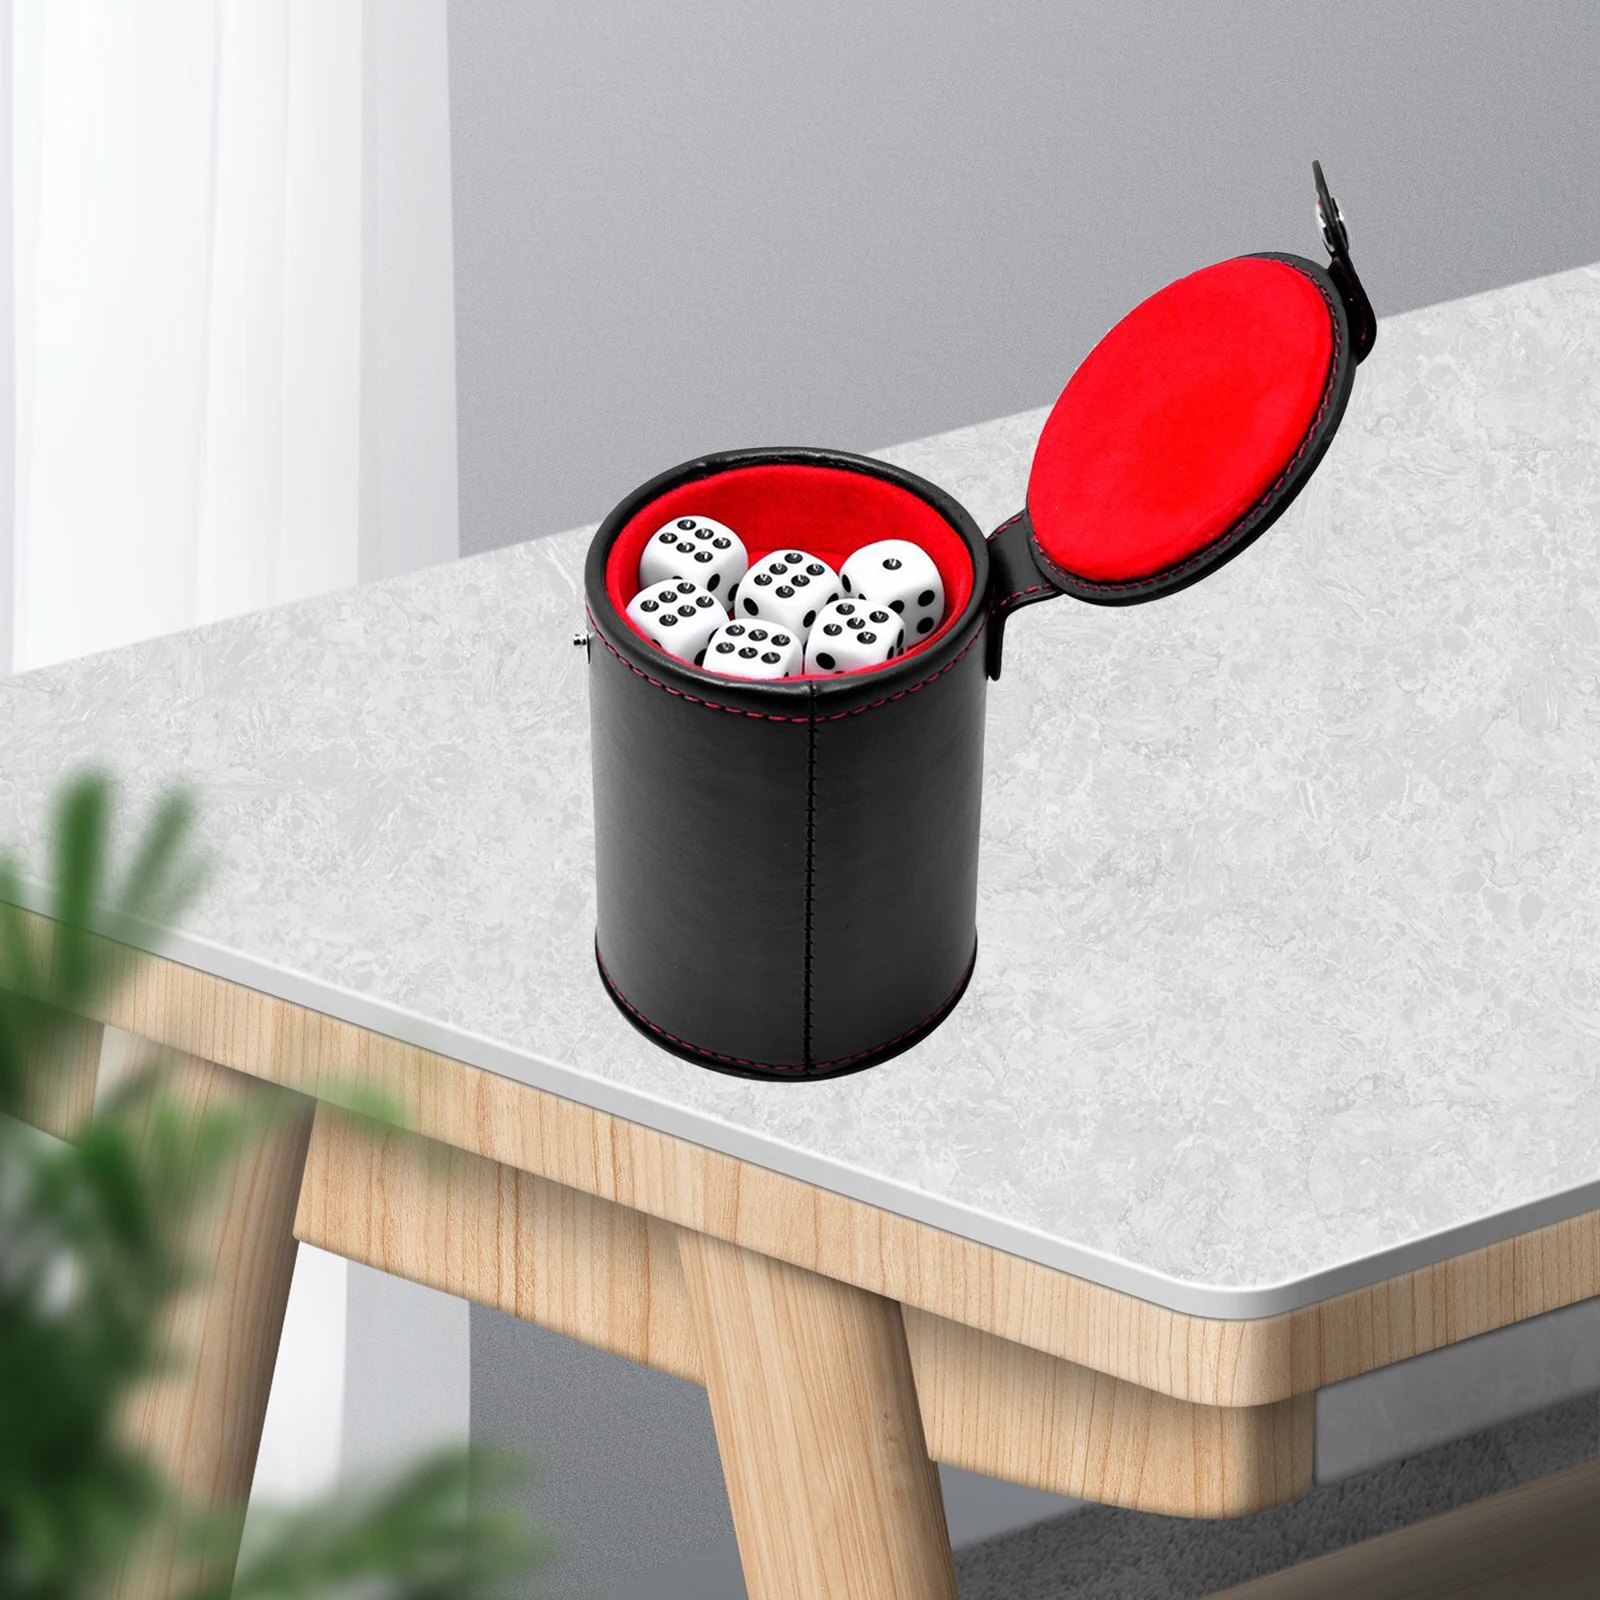 Black PU Leather Dice Cup with 5 Dice Red Flannel Lined Hand Shaking Dice Cup Dice Shaker Dice Decider Supplies Christmas